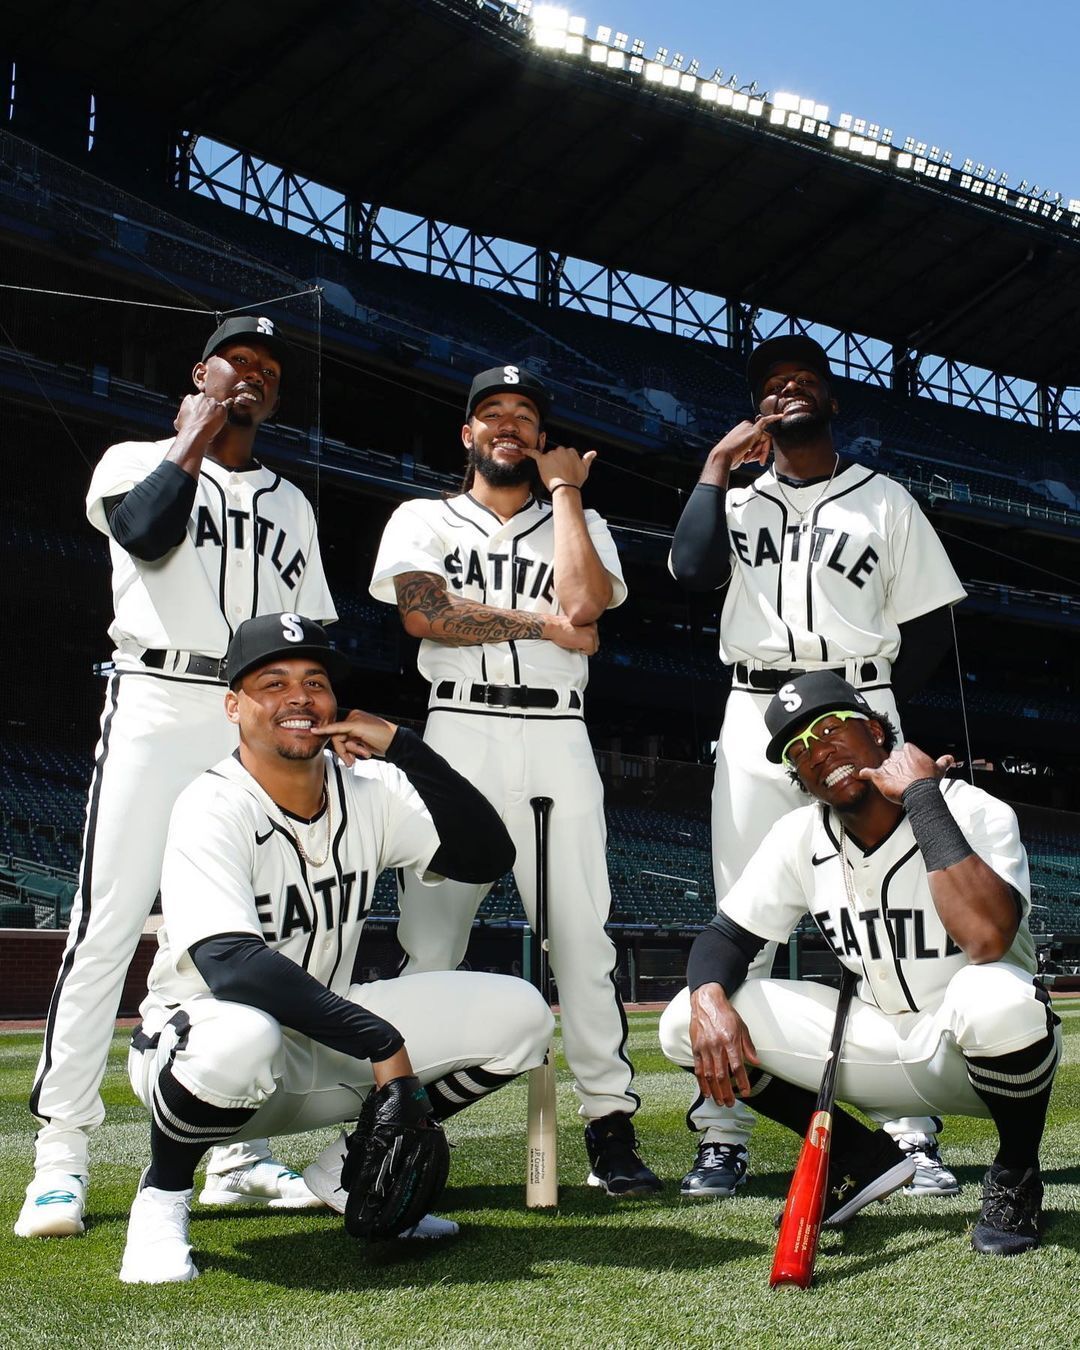 MLB on X: The Giants and Mariners paid tribute to the Negro